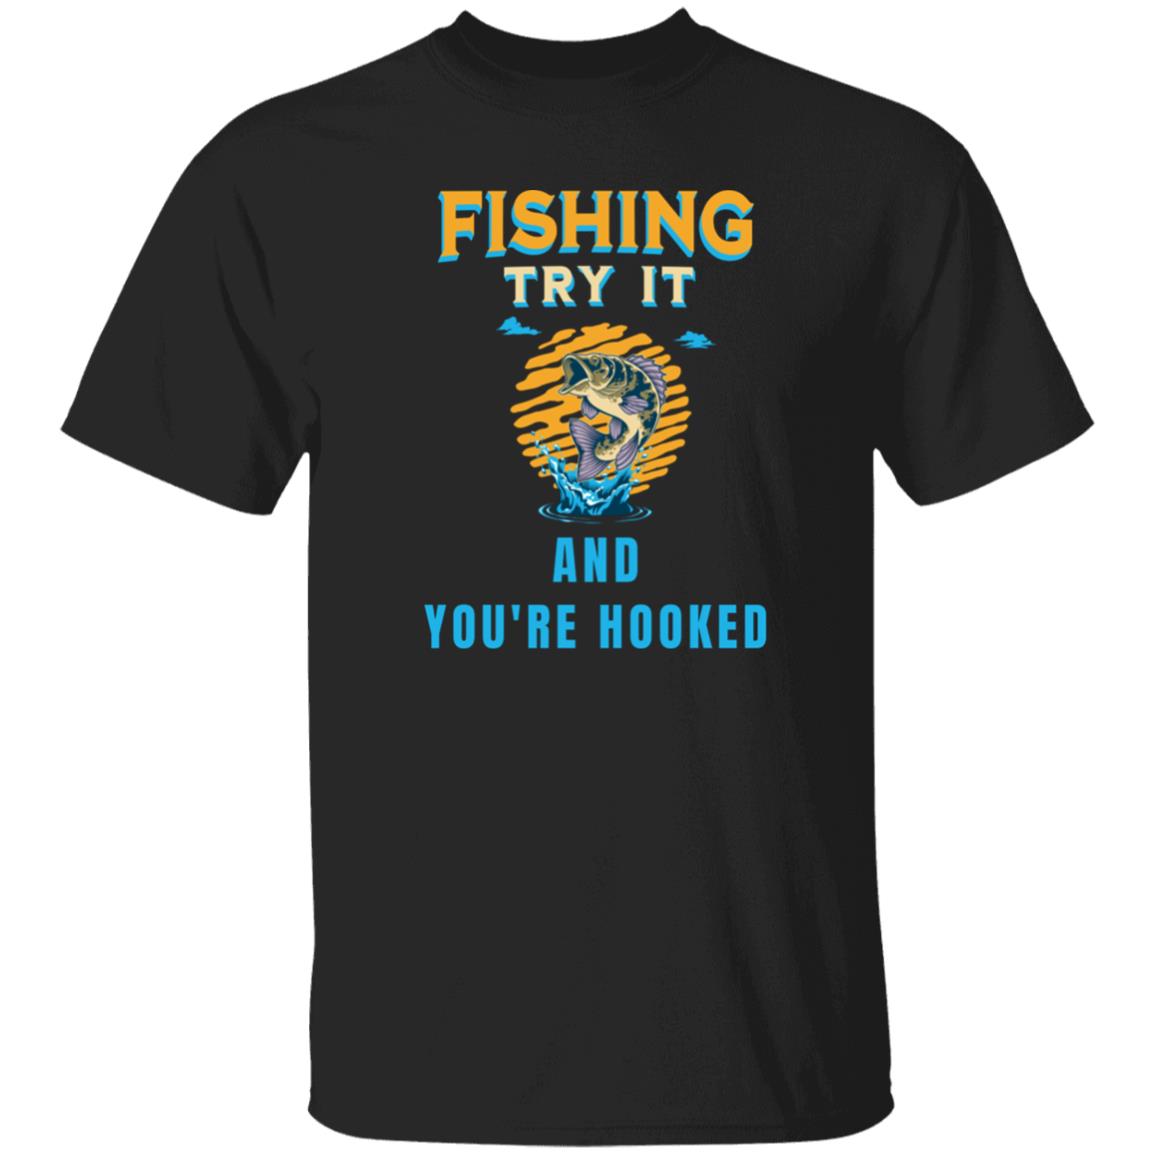 Fishing try it and you're hooked k t-shirt black